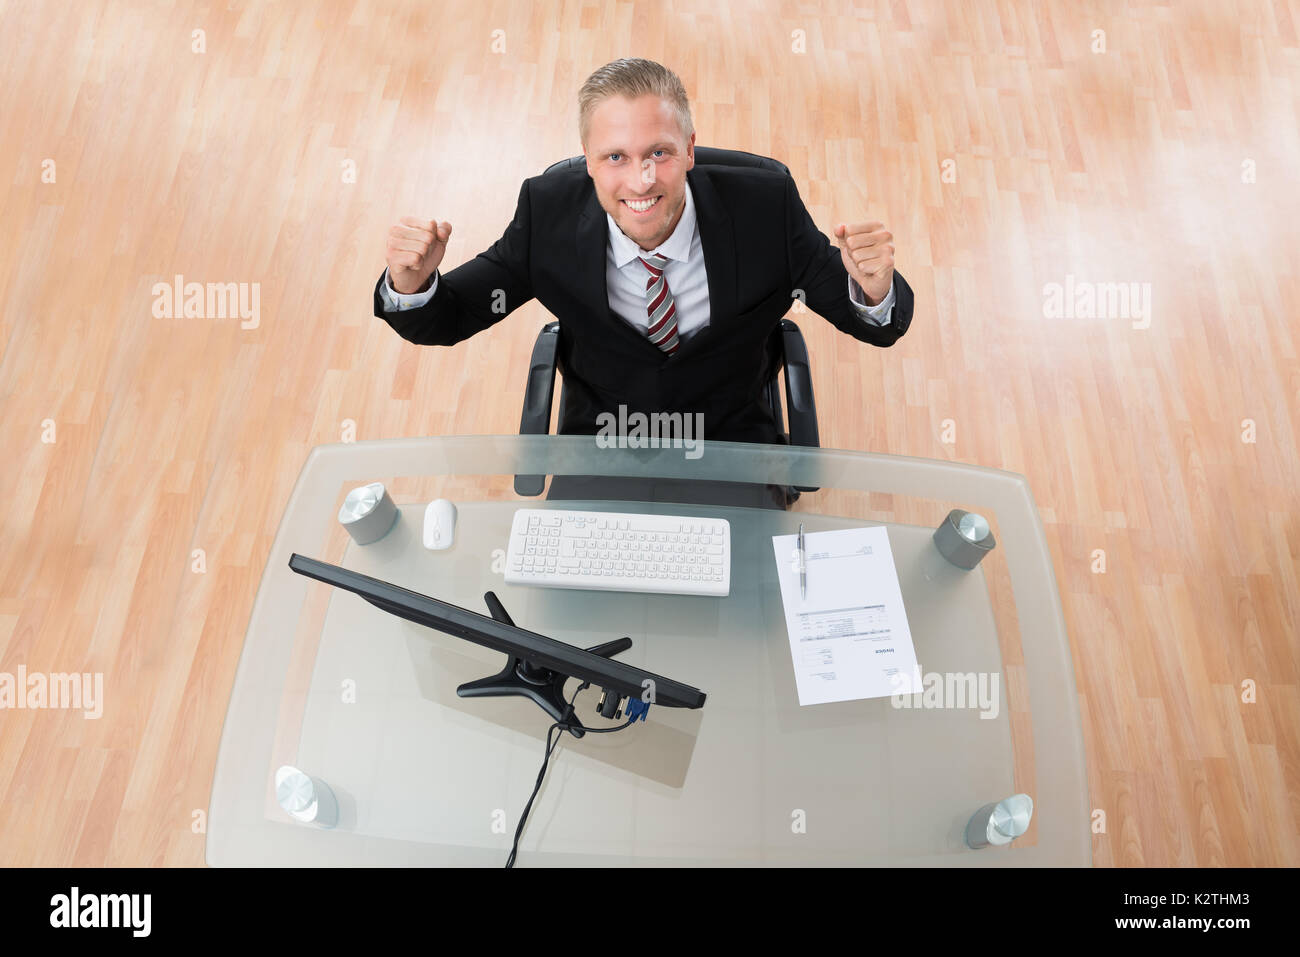 Young Happy Businessman Clenching His Fist At Workplace Stock Photo